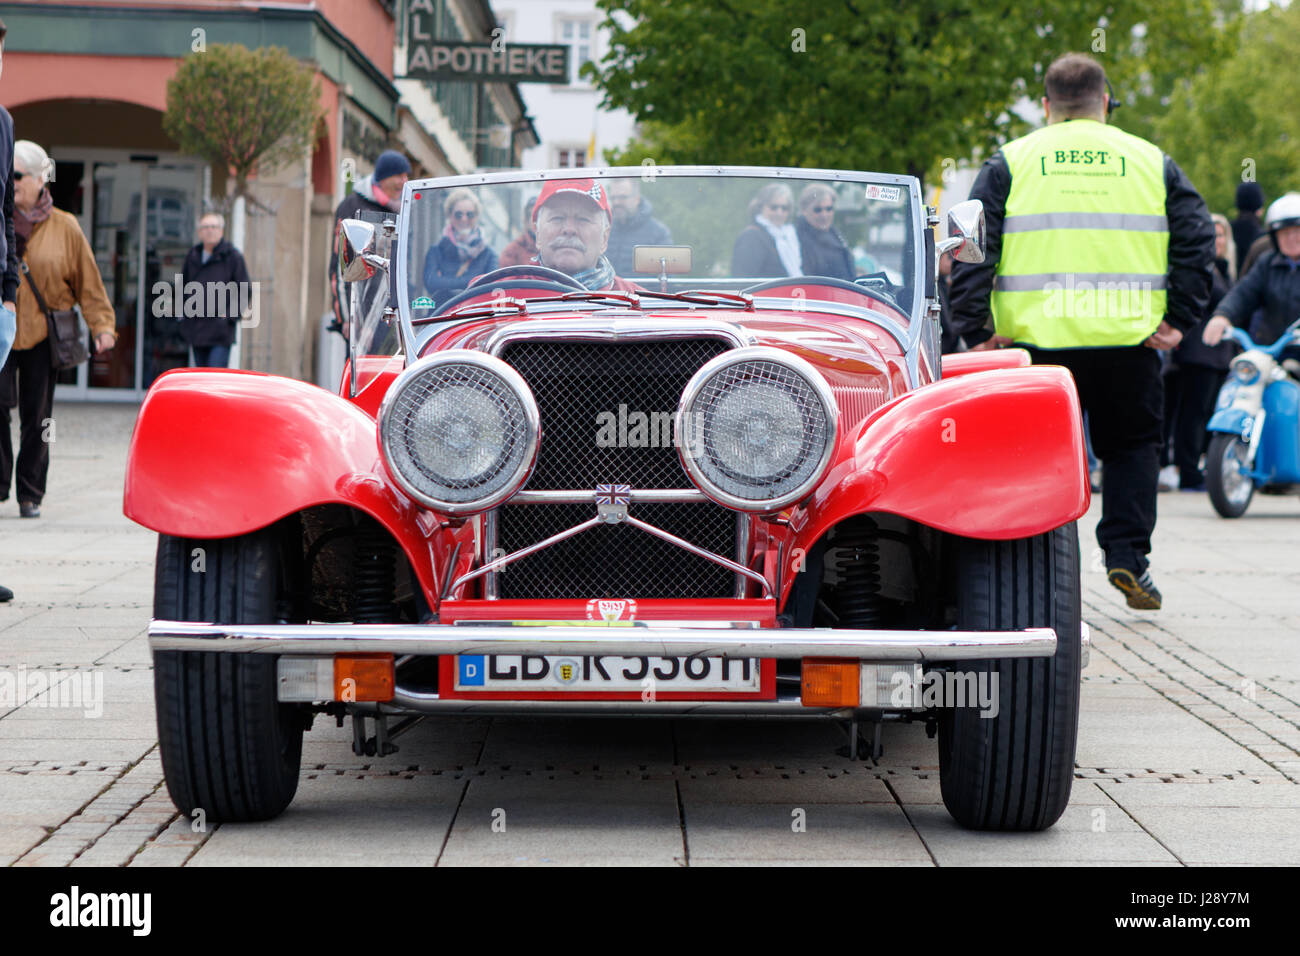 LUDWIGSBURG, GERMANY - APRIL 23, 2017: Panther J72 oldtimer car at the eMotionen event on April 23, 2017 in Ludwigsburg, Germany. Front view. Stock Photo